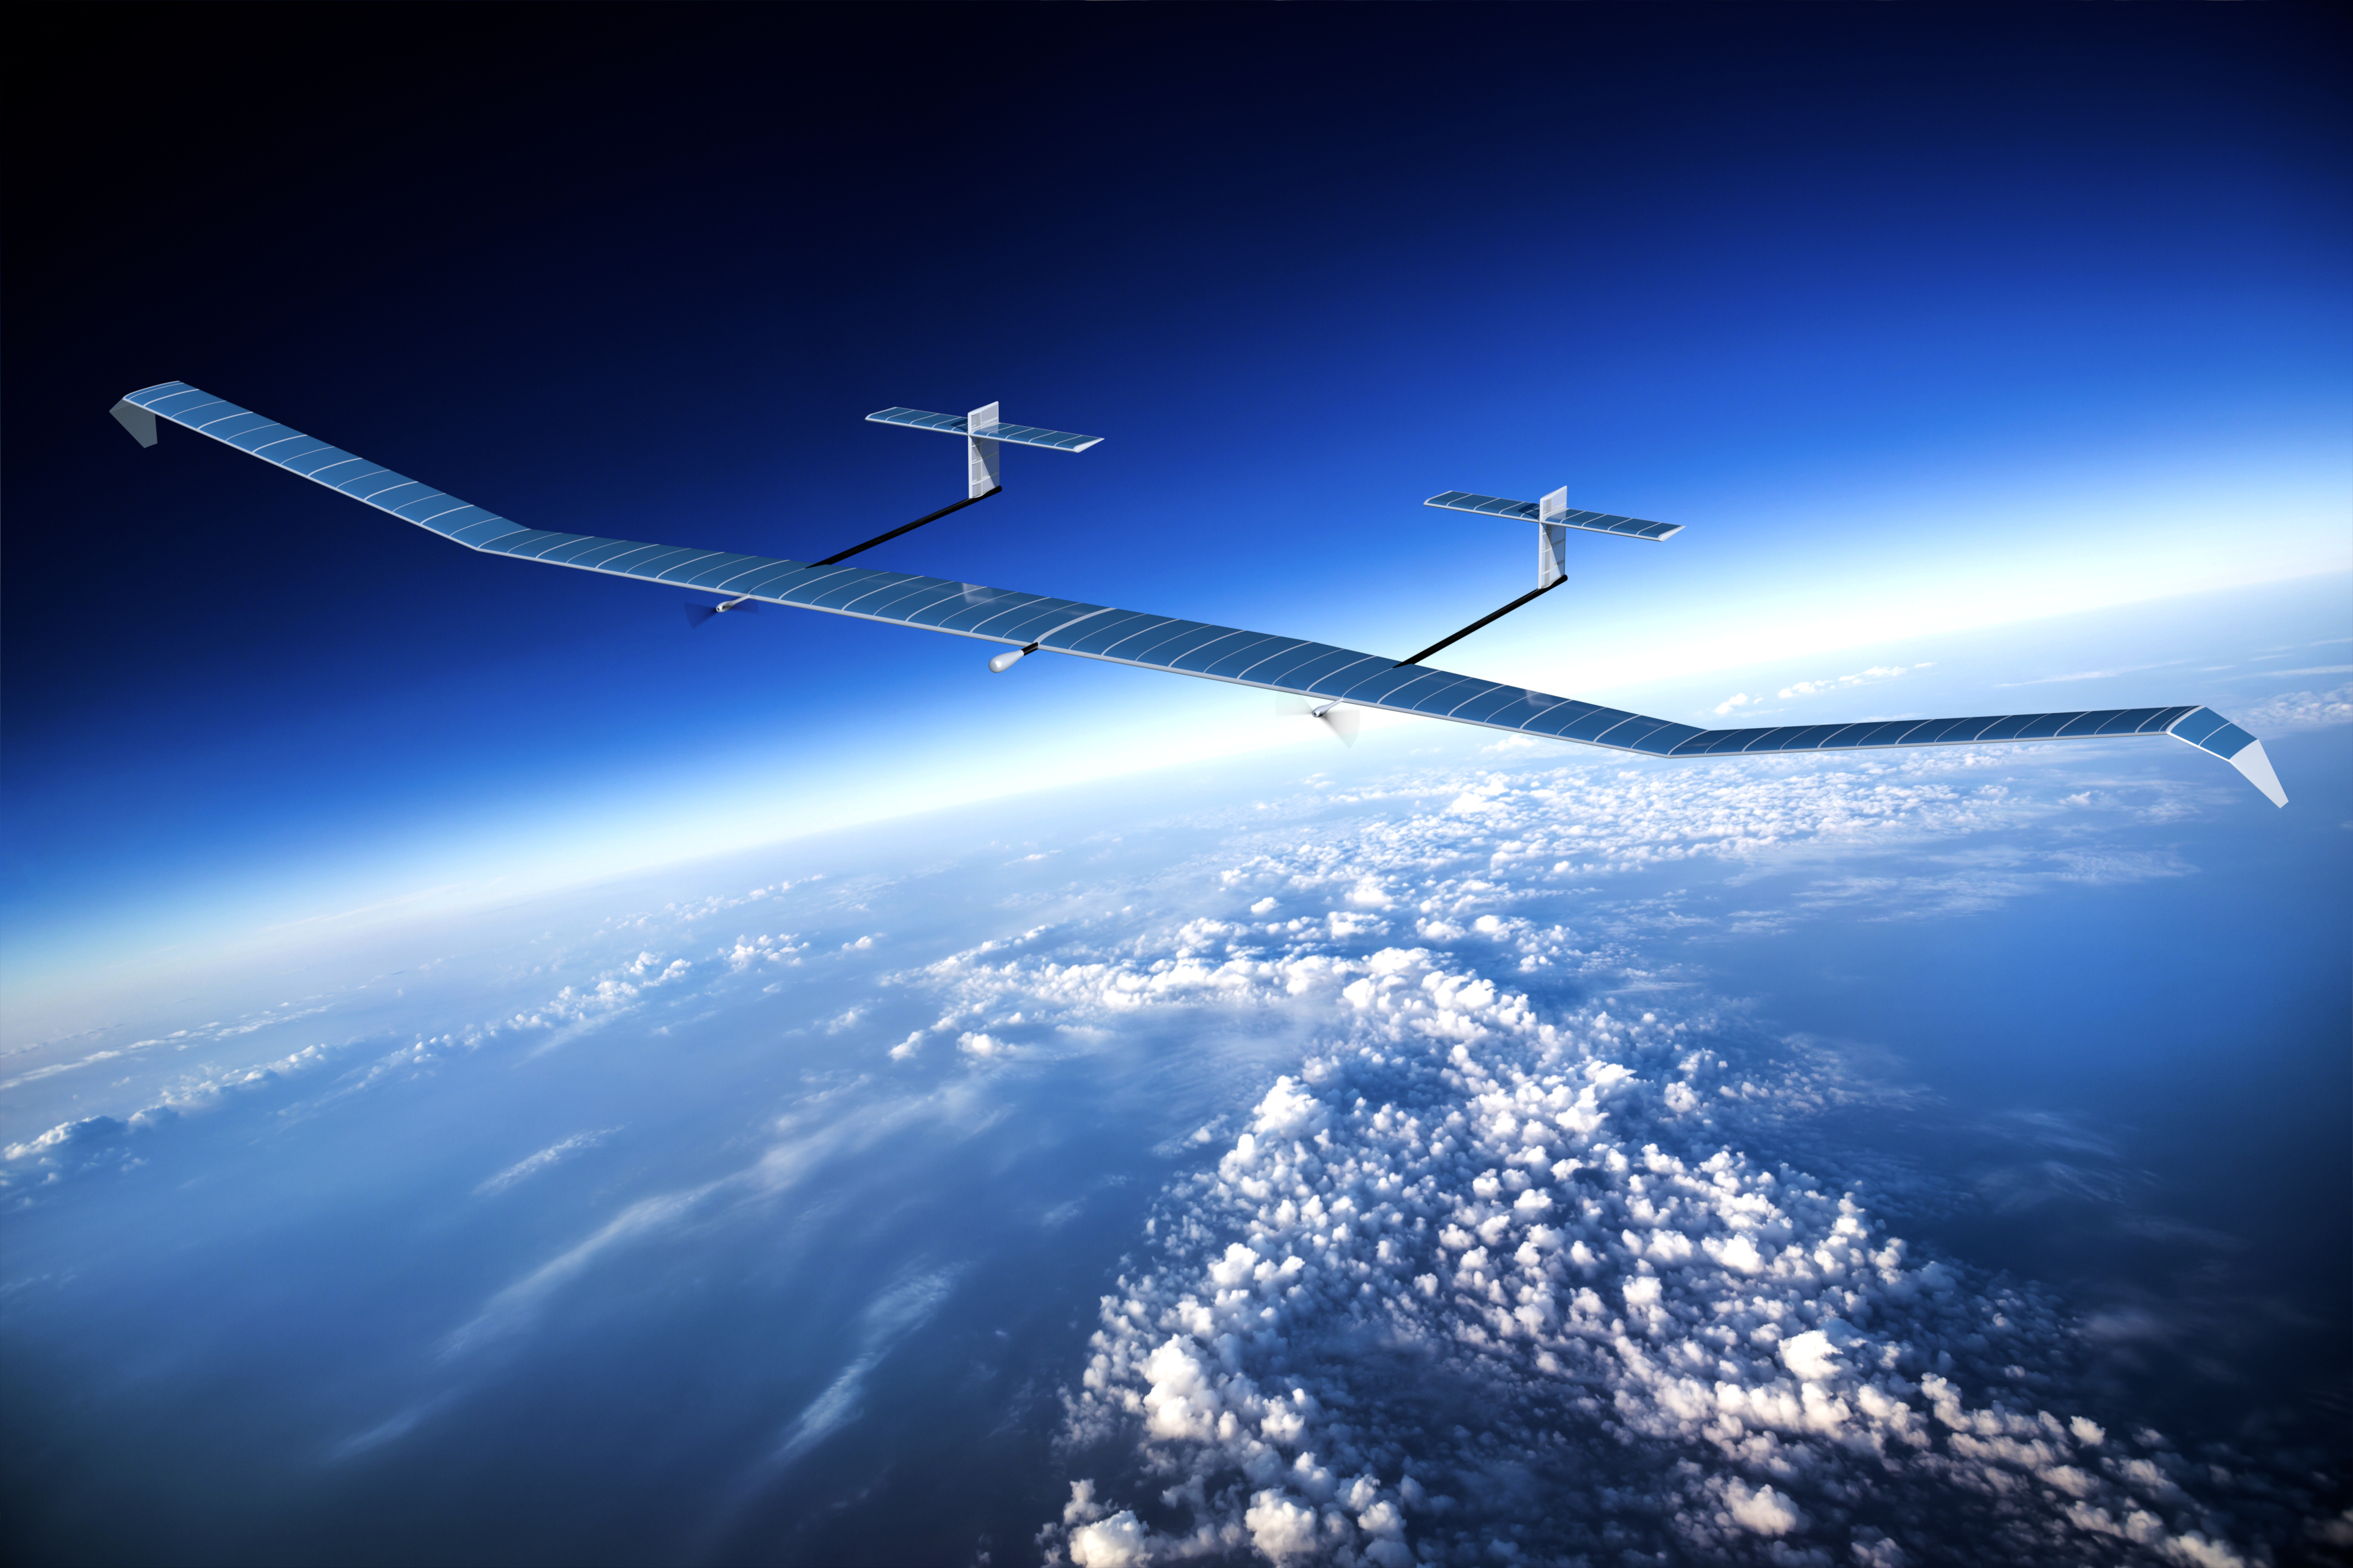 Airbus Zephyr drone sets new record for uncrewed flight duration